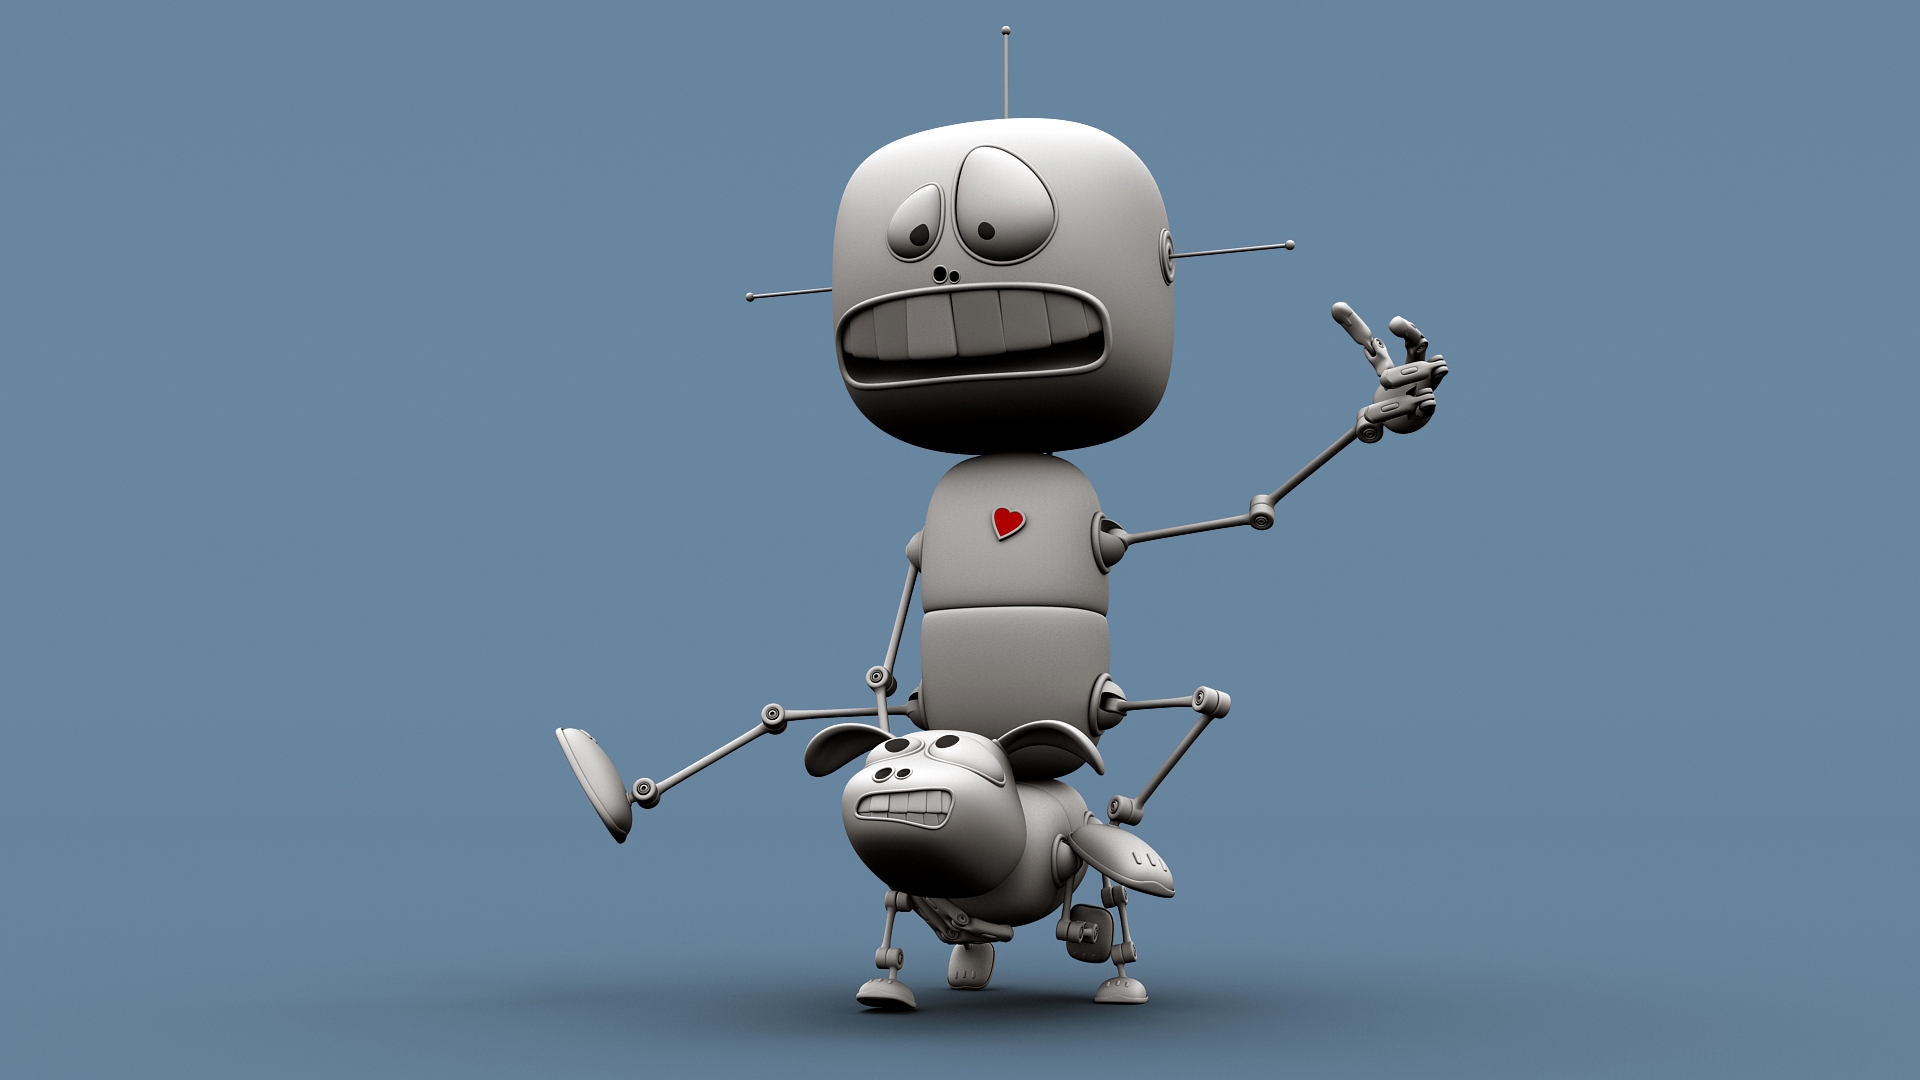 Some Funny Robots for 1920 x 1080 HDTV 1080p resolution